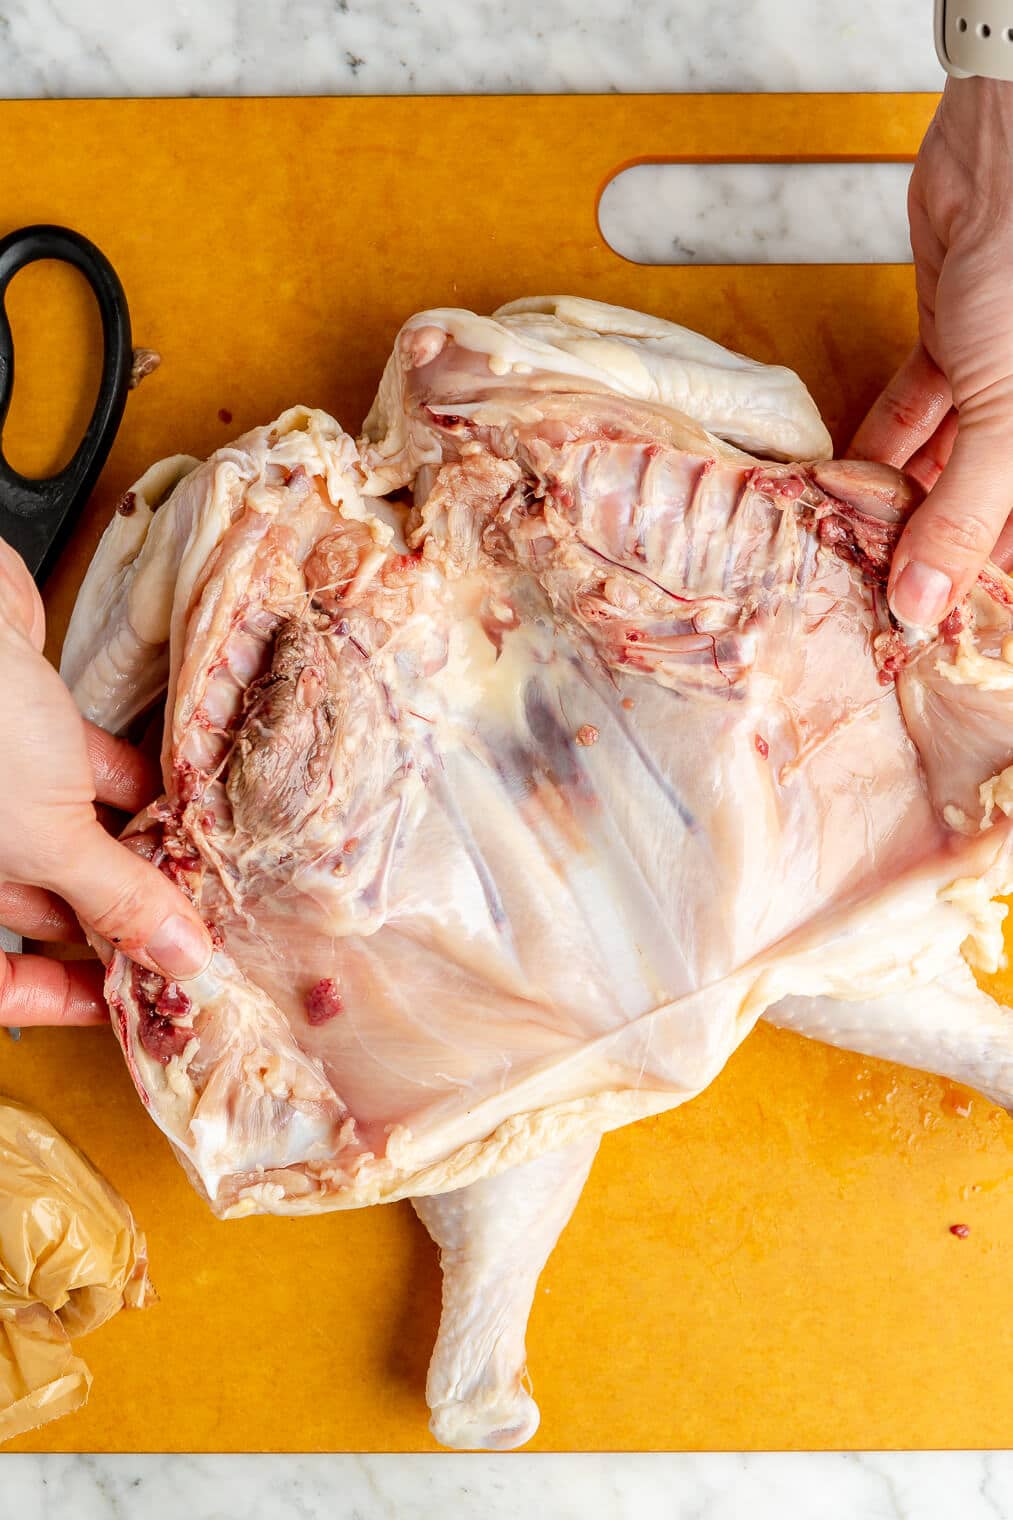 A raw whole chicken with the spine cut out on a large orange cutting board.